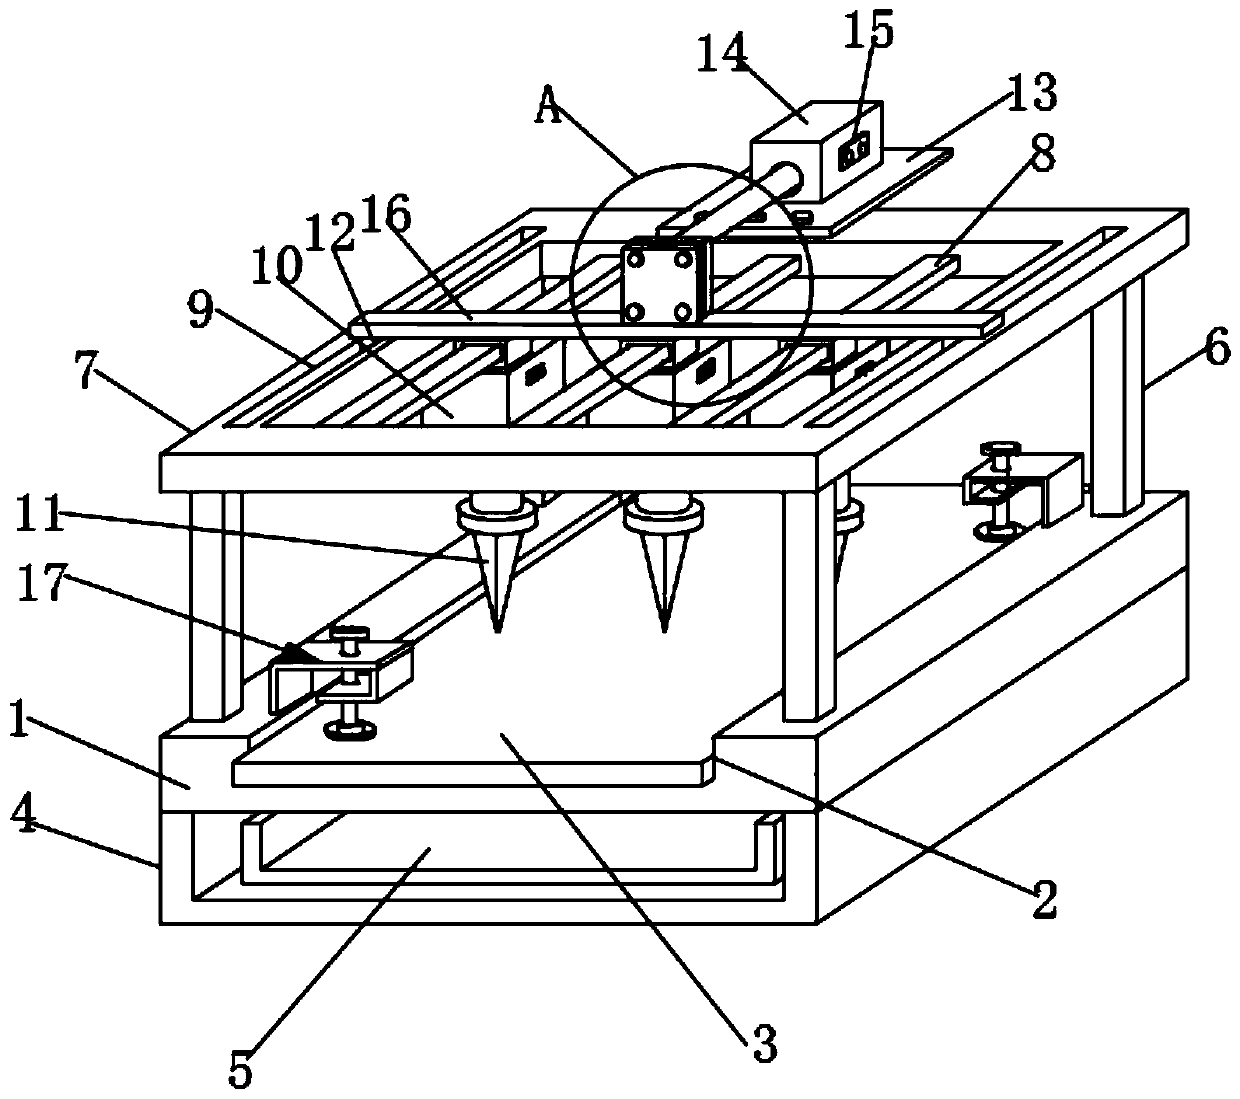 A positioning punching device for building aluminum formwork